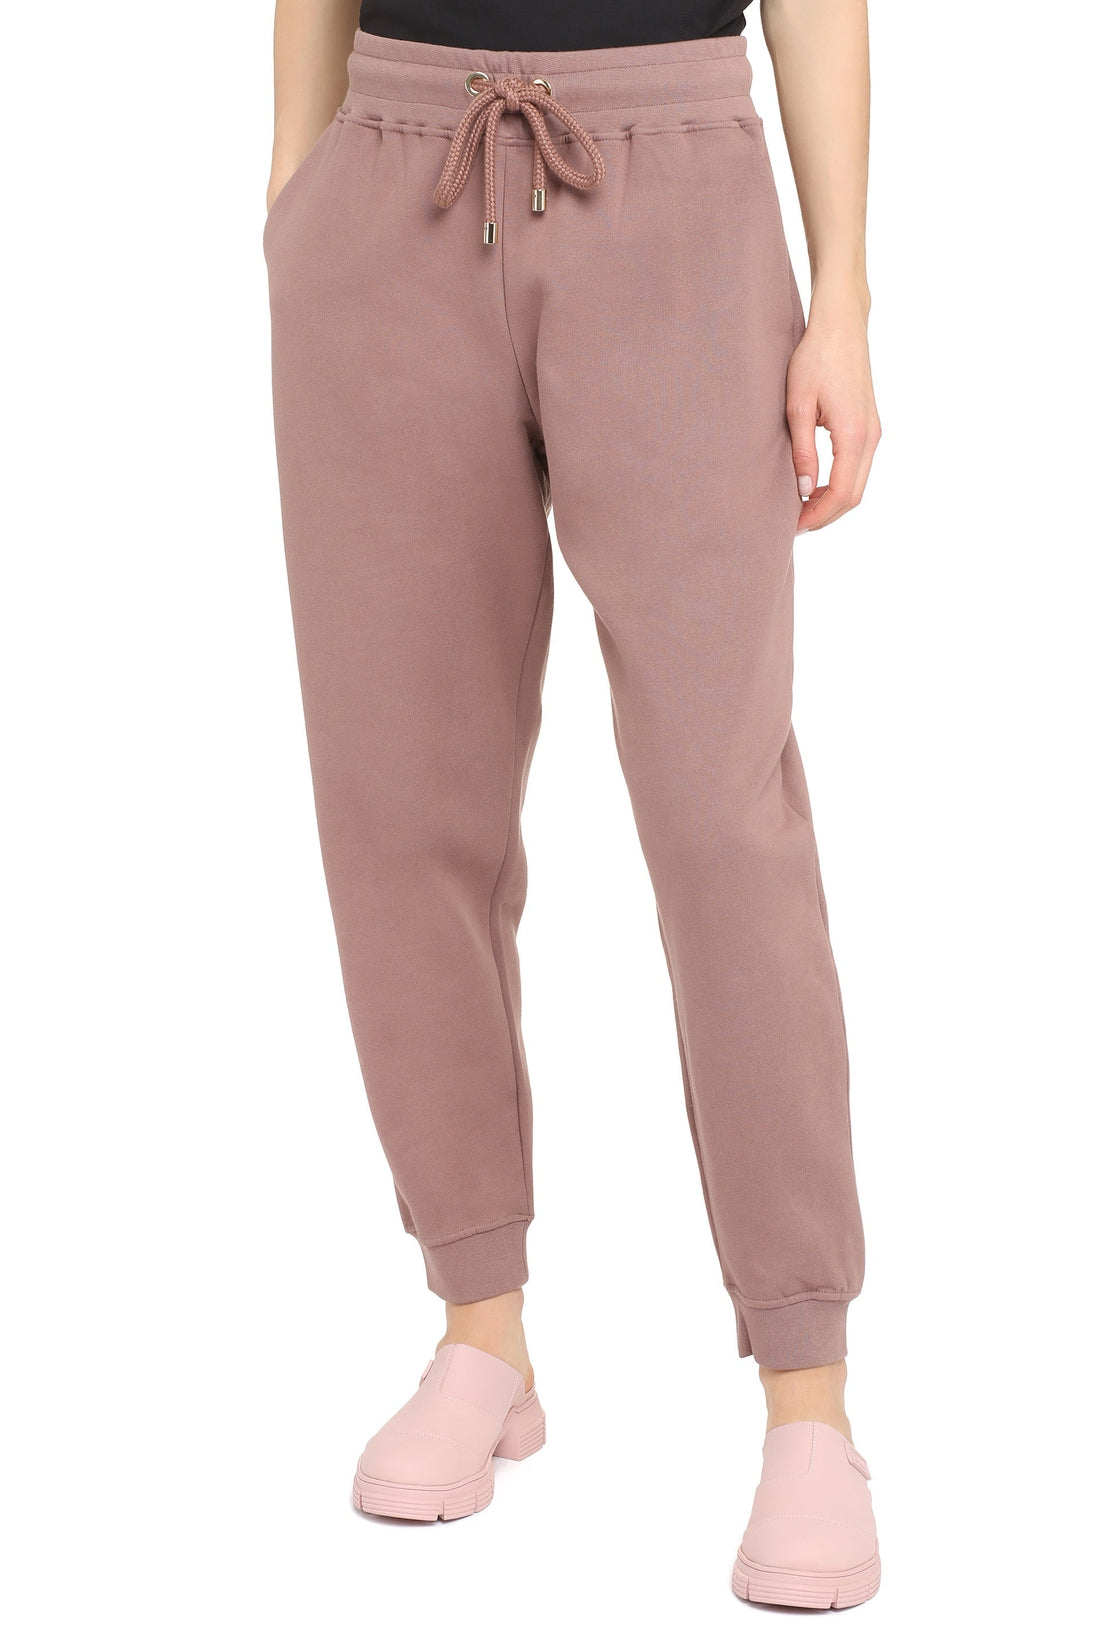 MOTHER OF PEARL-OUTLET-SALE-Jude sweatpants-ARCHIVIST